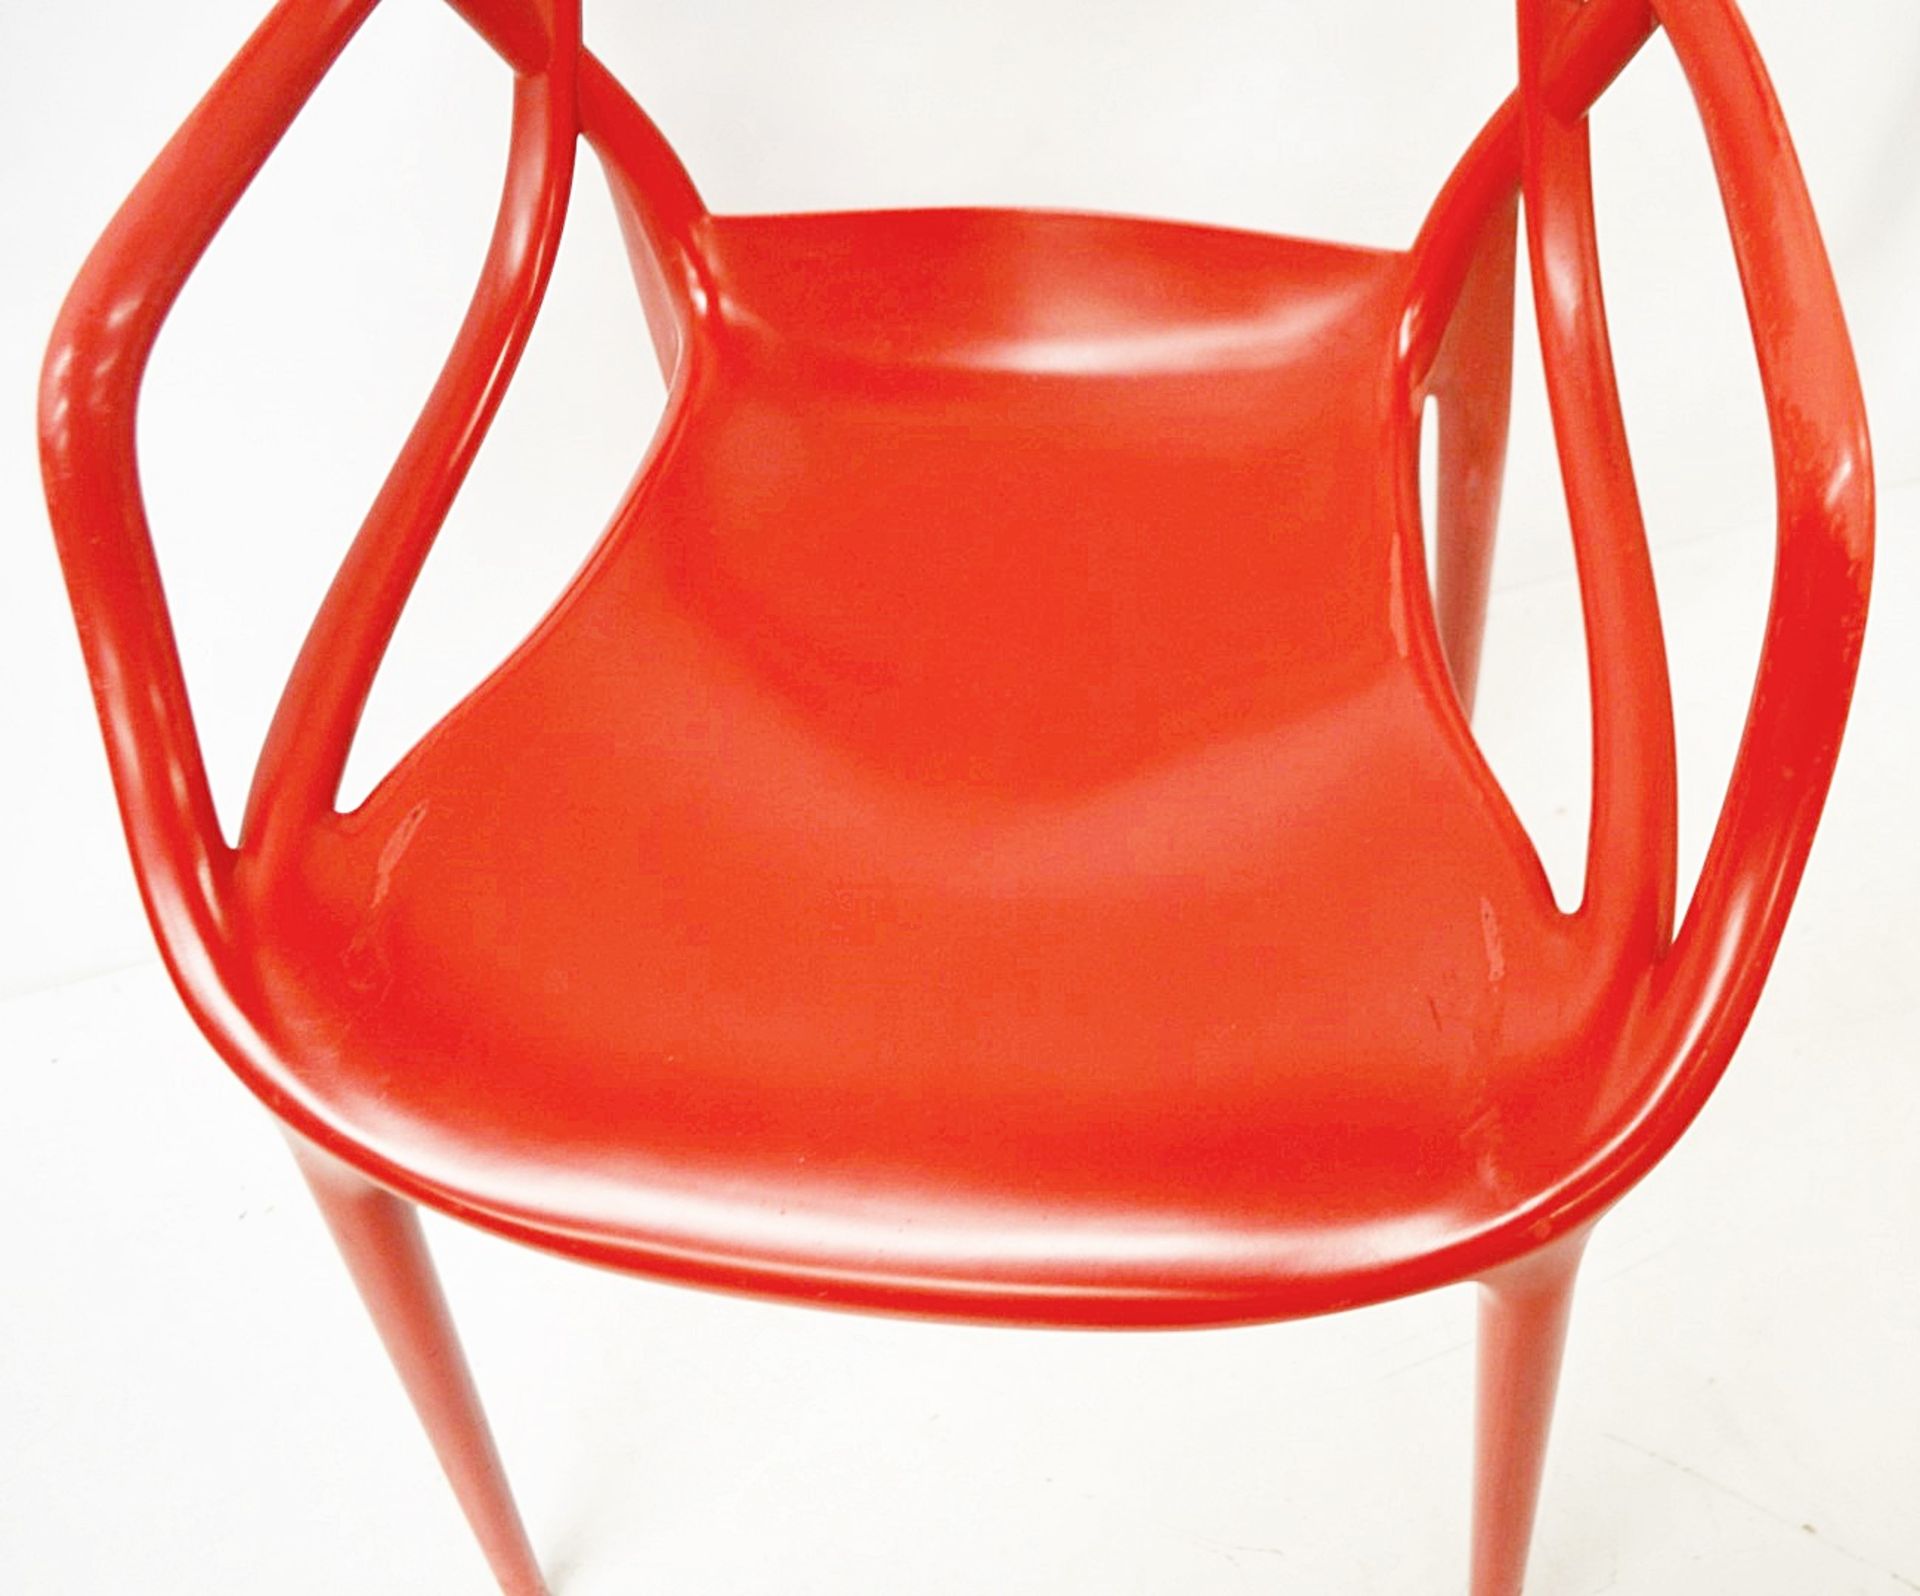 4 x Philippe Starck For Kartell 'Masters' Designer Red Gloss Bistro Chairs - Made In Italy - Used - Image 2 of 9